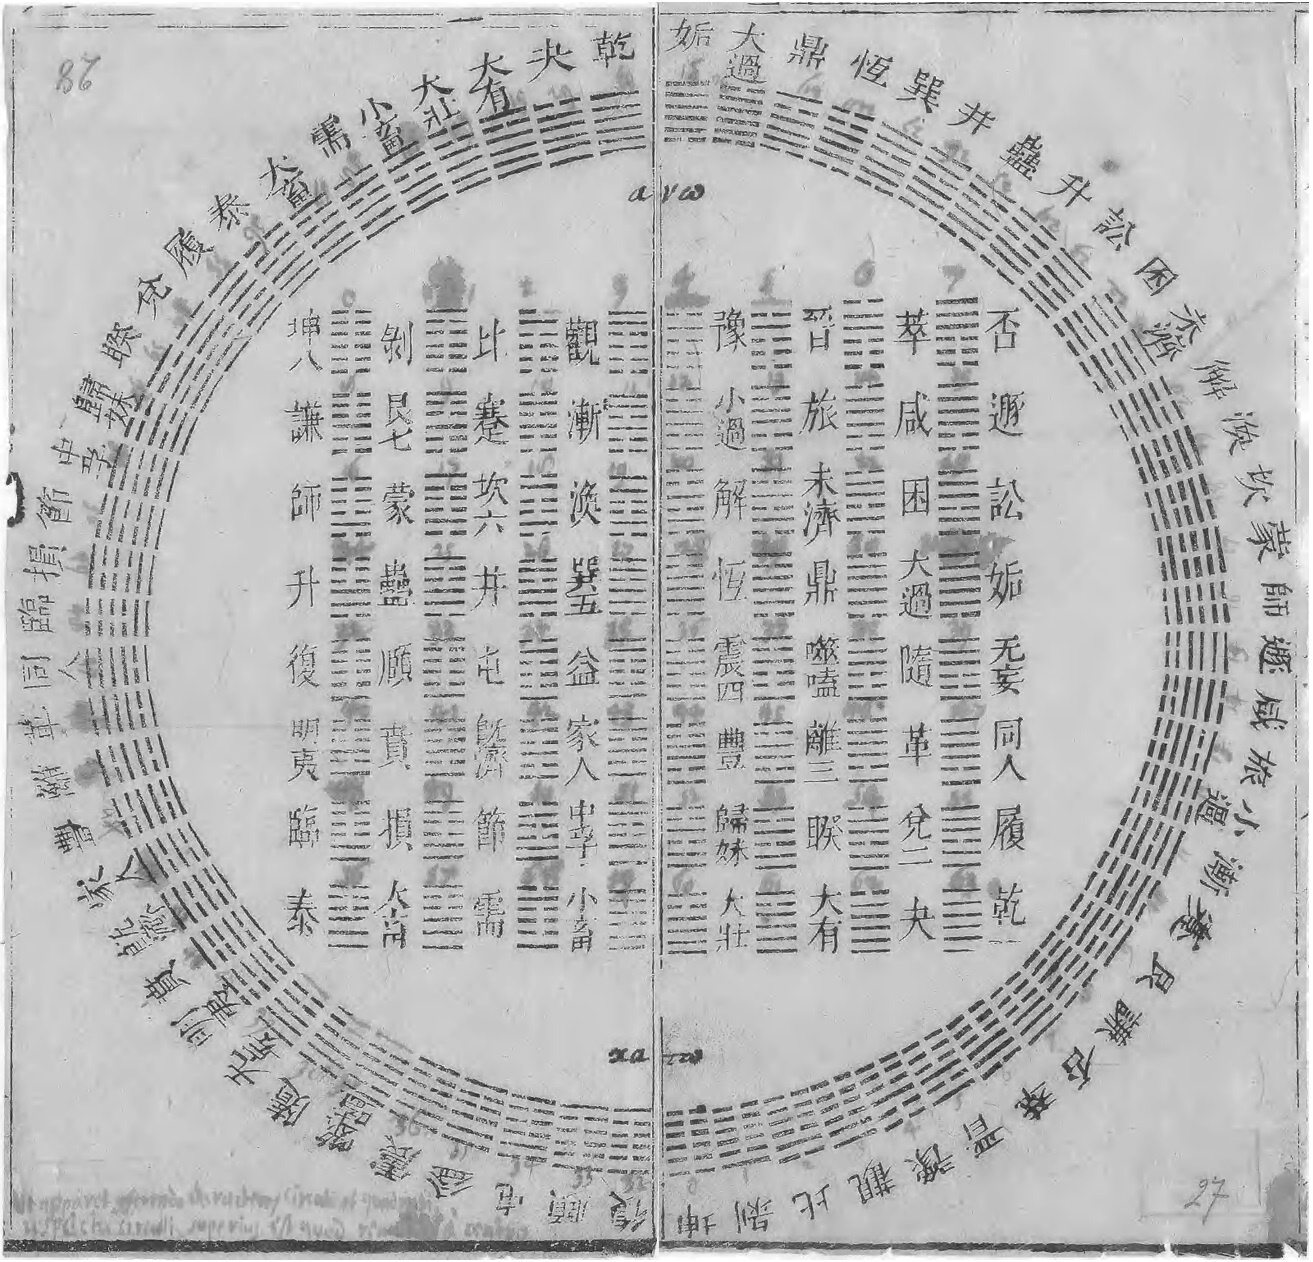 Diagram-of-I-Ching-hexagrams-Wikimedia-Commons